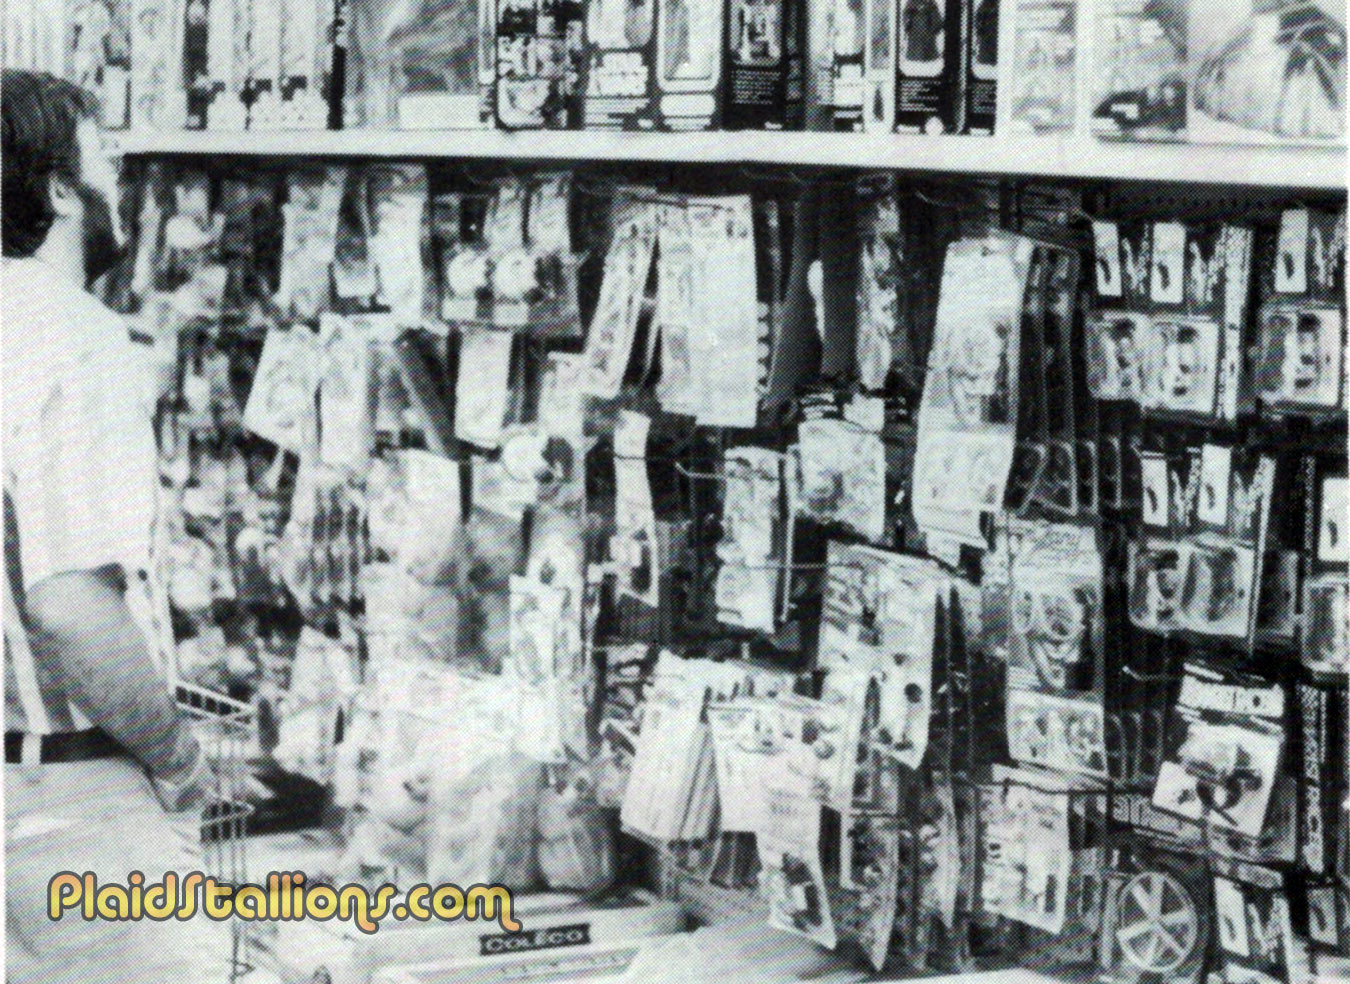 A display of Rack Toys in 1981 